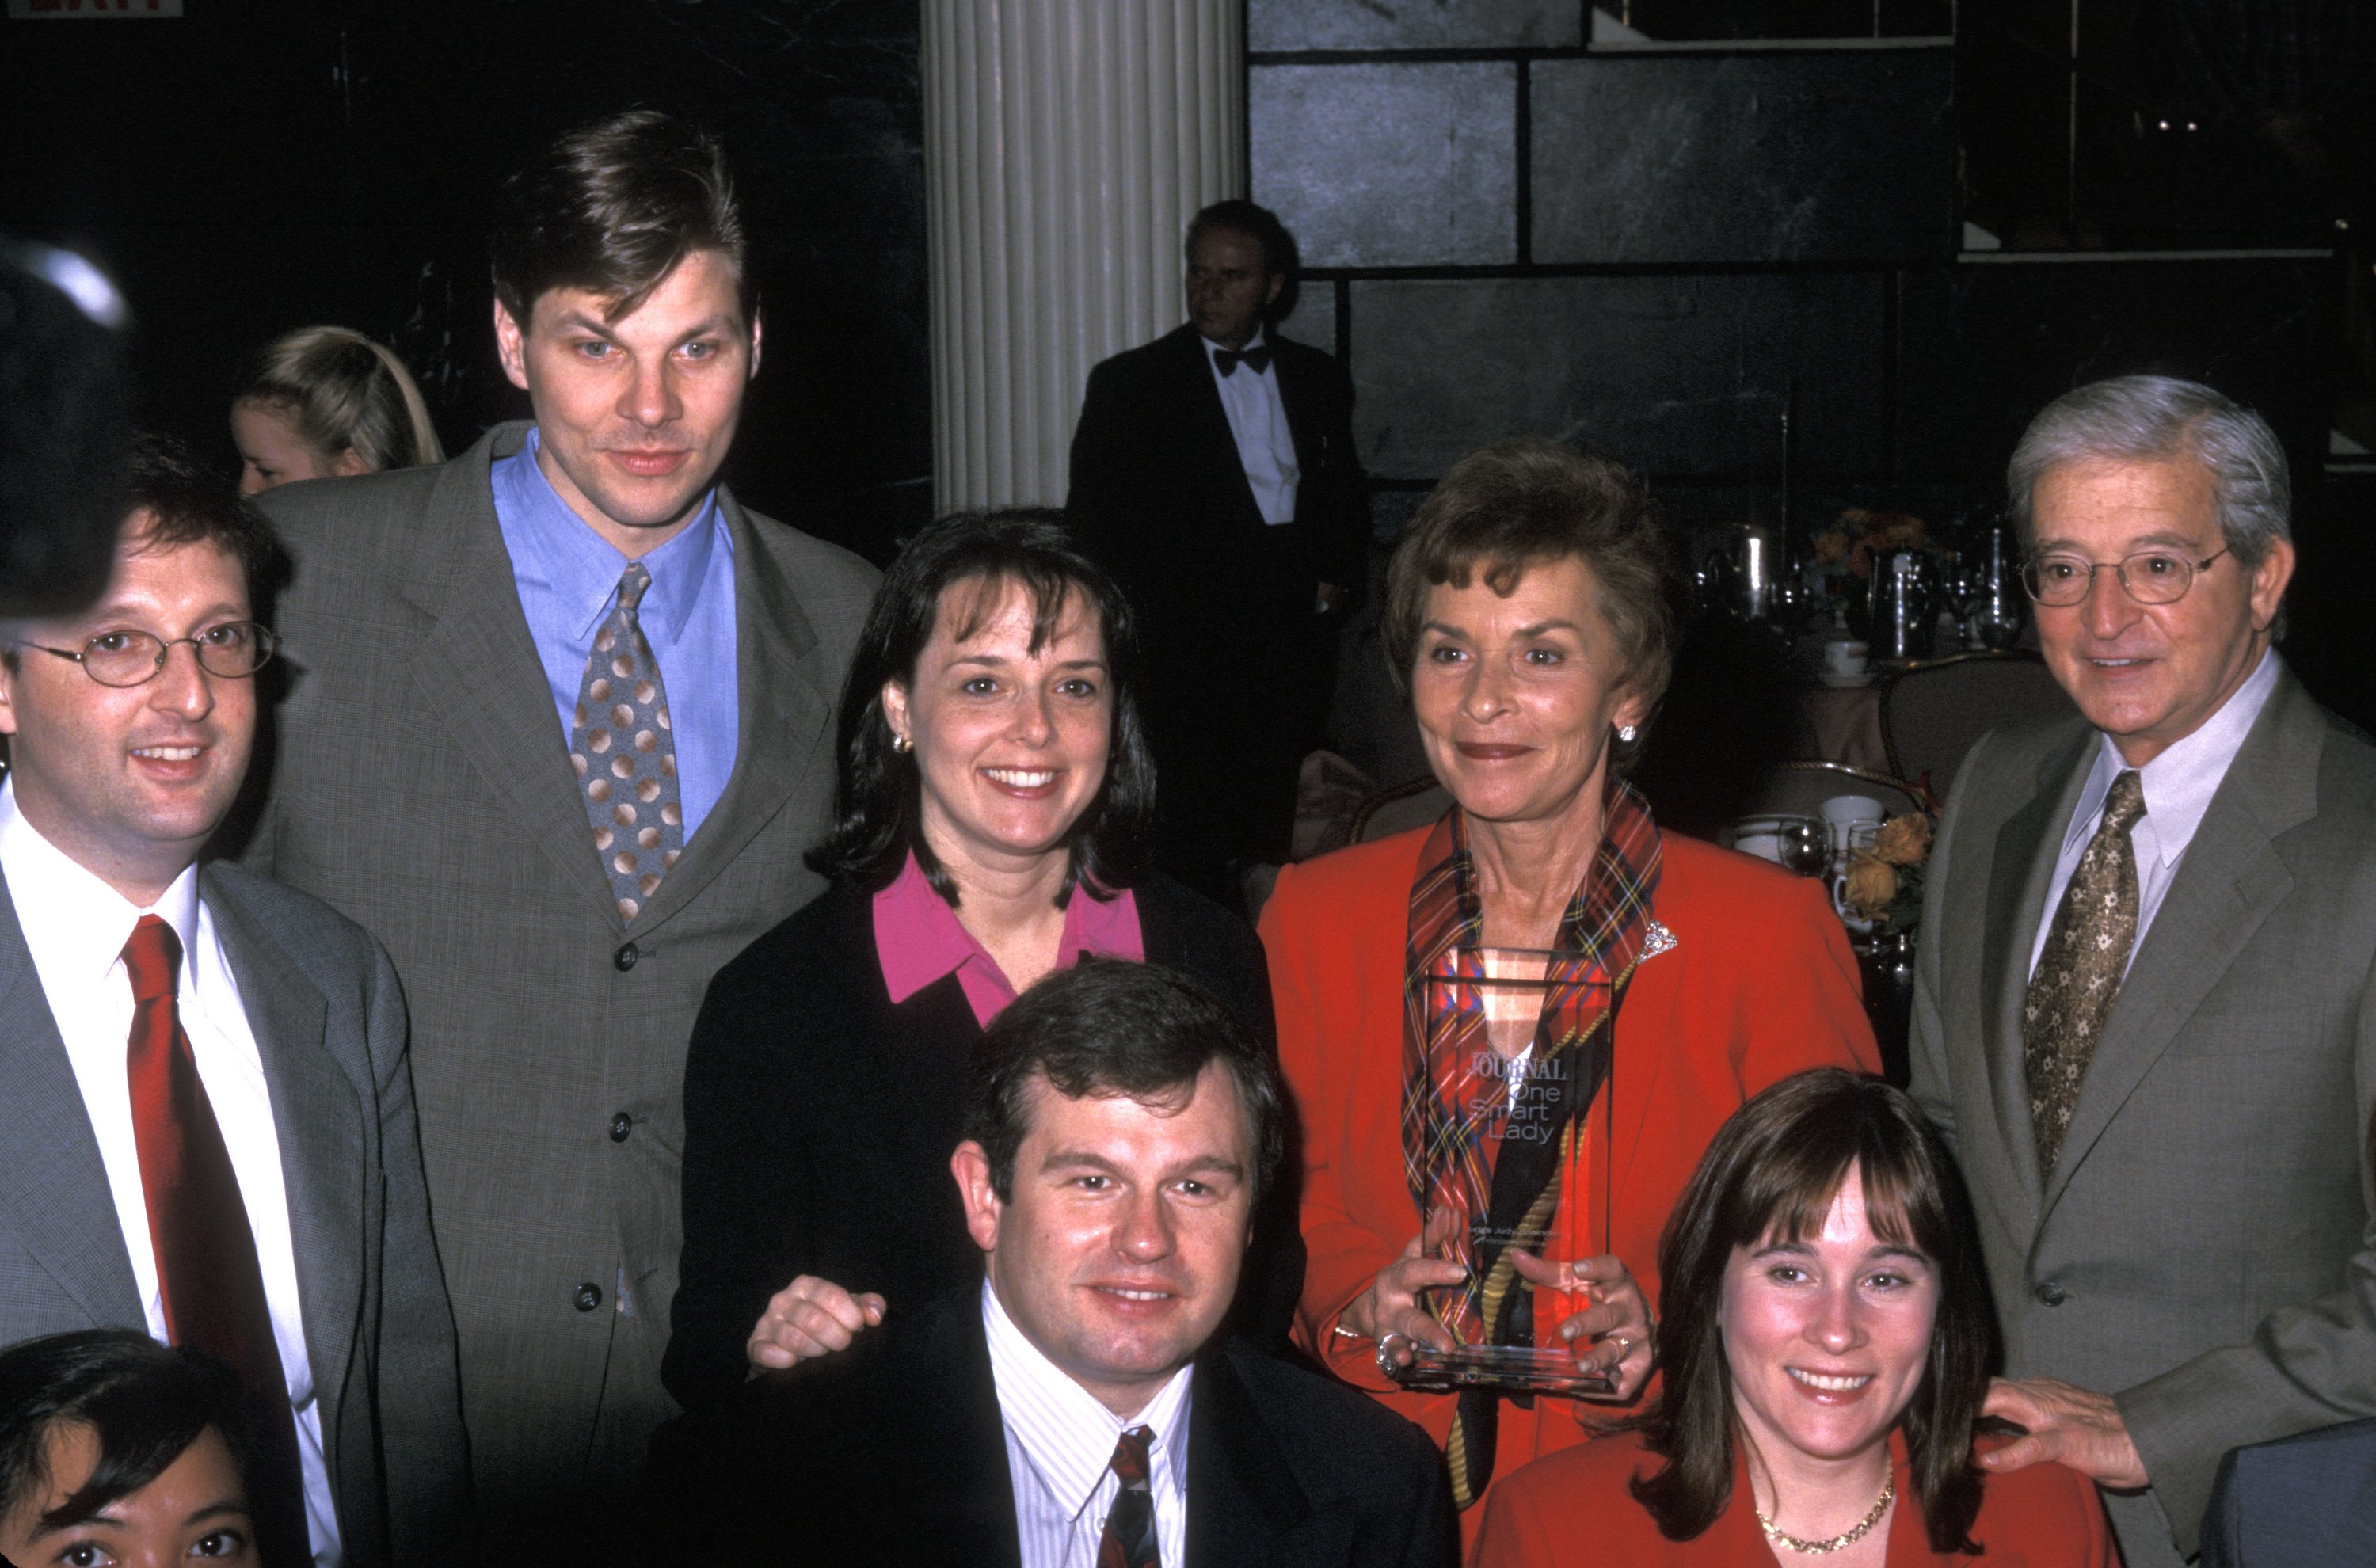 Judy and Jerry Sheindlin with family at the Ladies Home Journal "One Smart Lady Award" on February 23, 2000, in New York City | Source: Getty Images